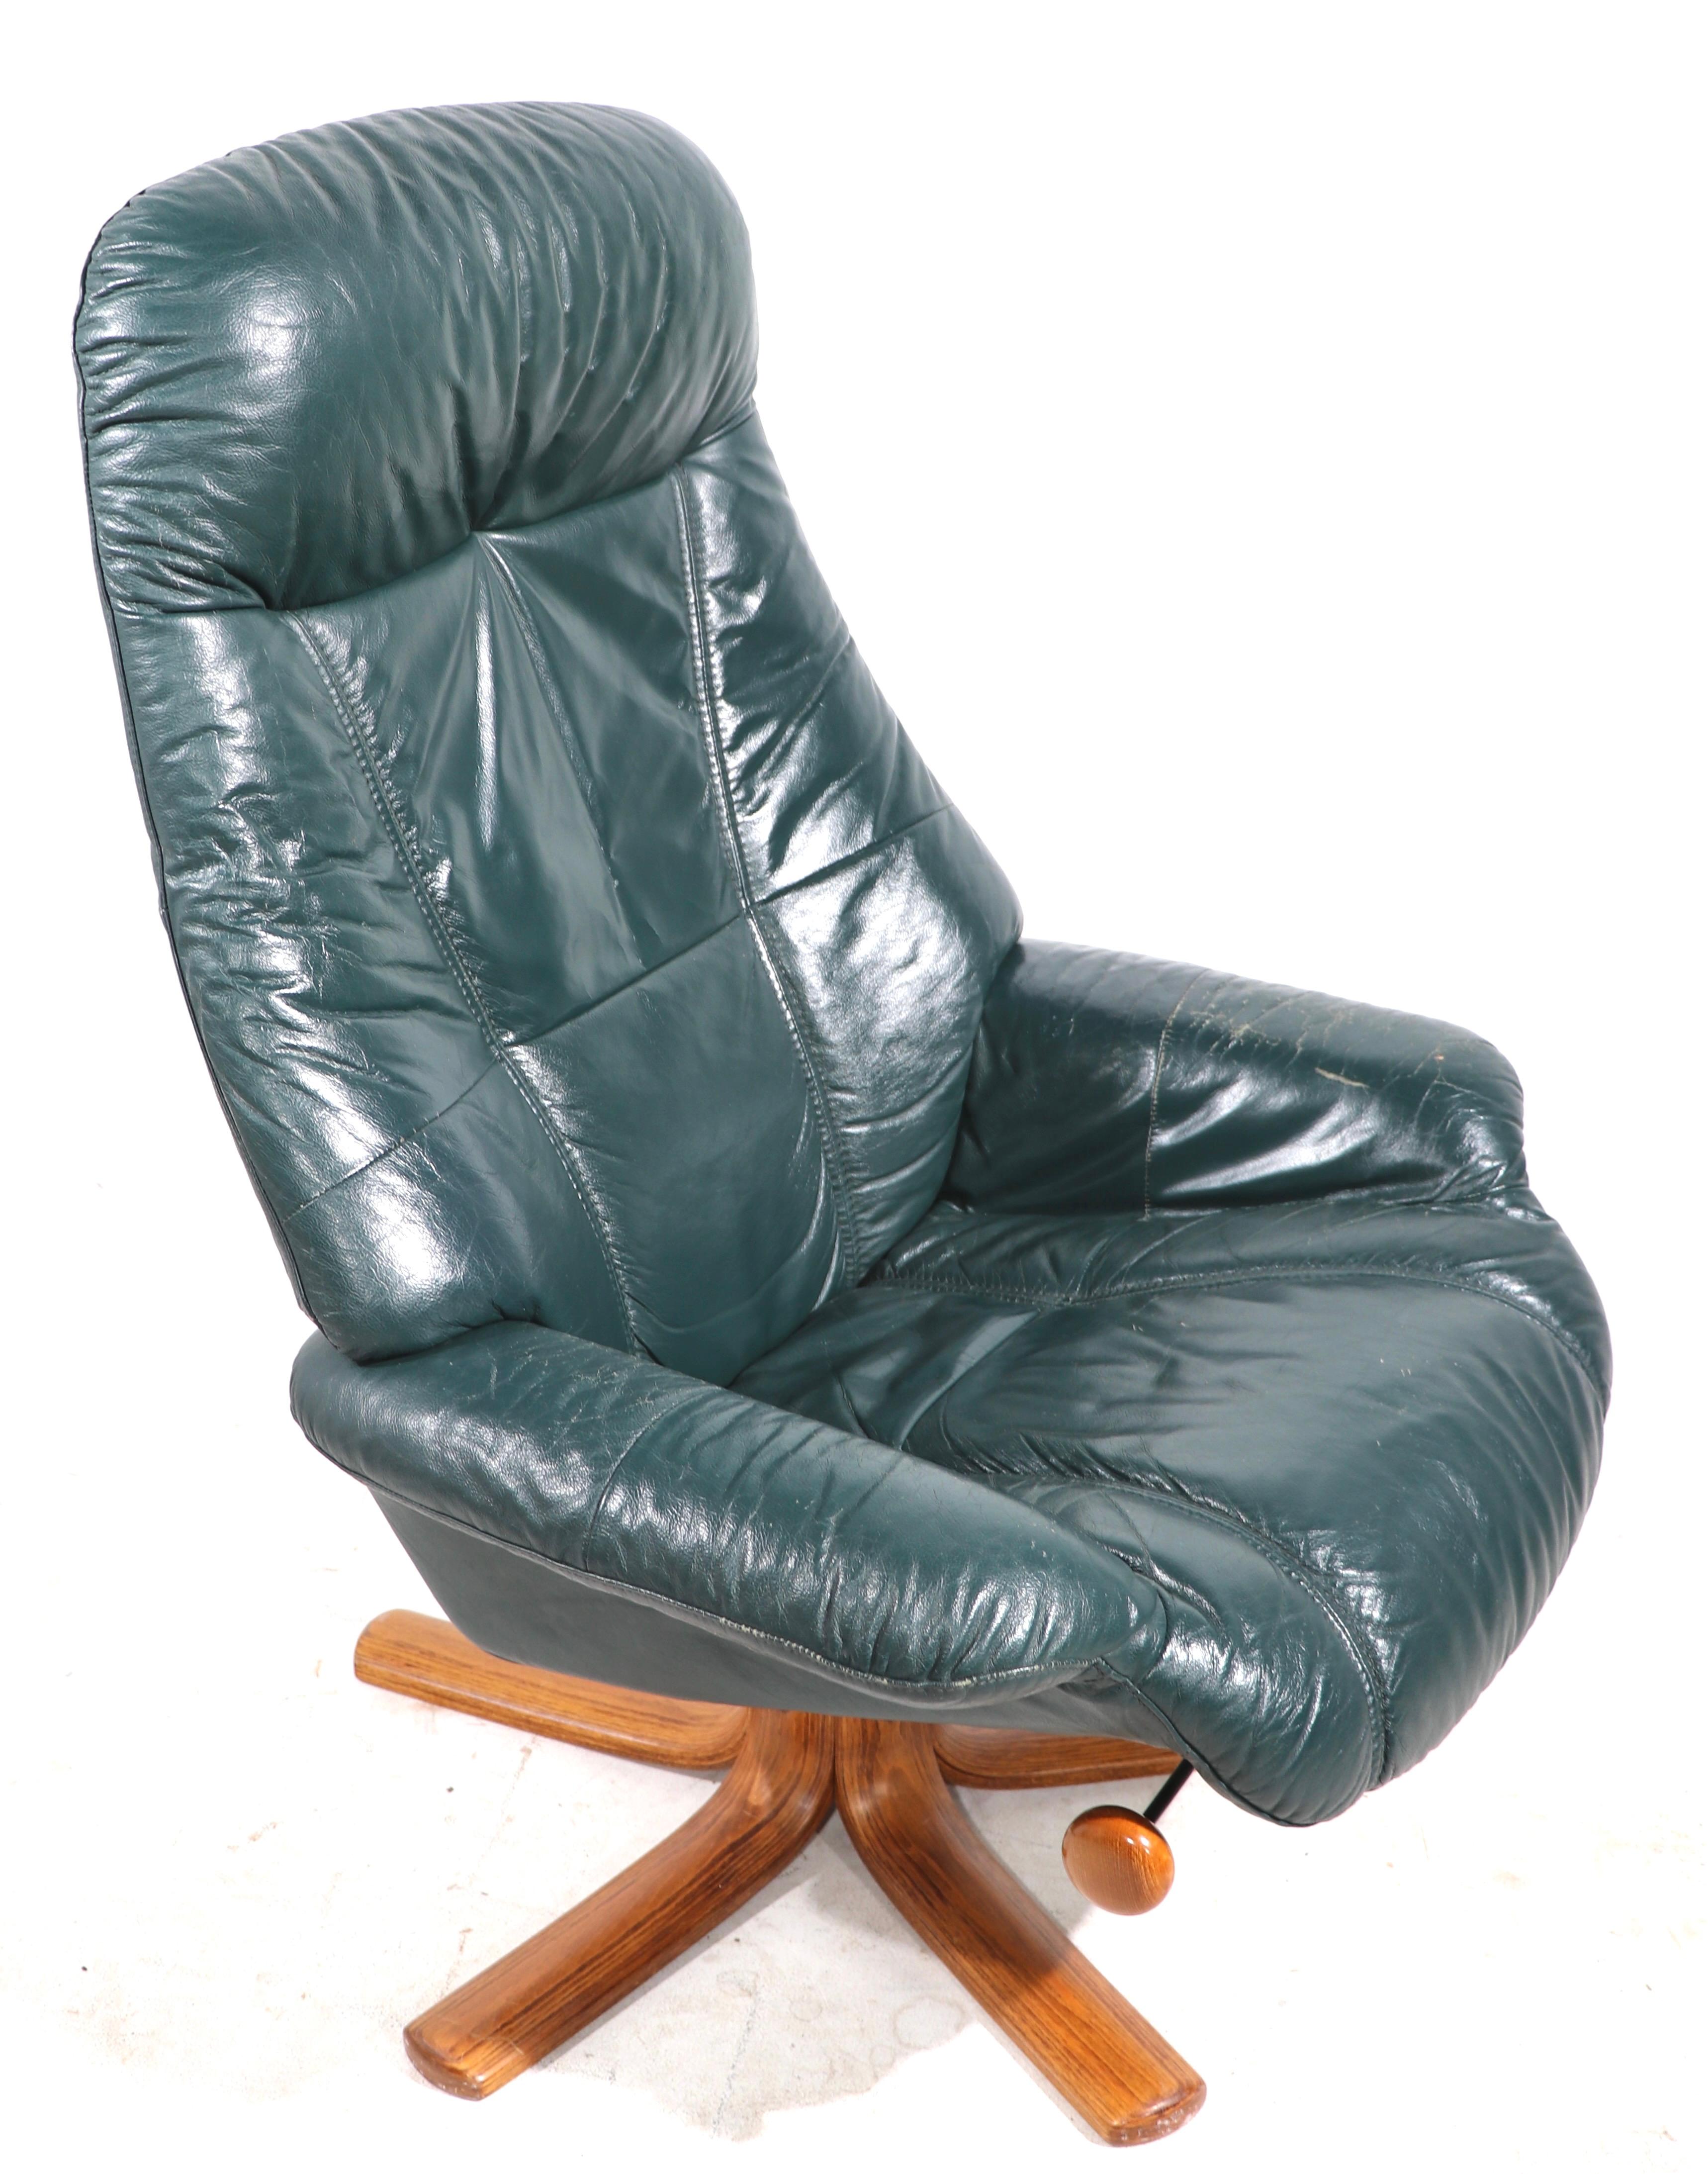 Comfort, style and quality - Scandinavian Modern leather recliner with ottoman by Hjellegierde Mobler. The leather is medium dark green, the chair swivels, and the back reclines - the car and ottoman are on splay leg wooden bases. Great original